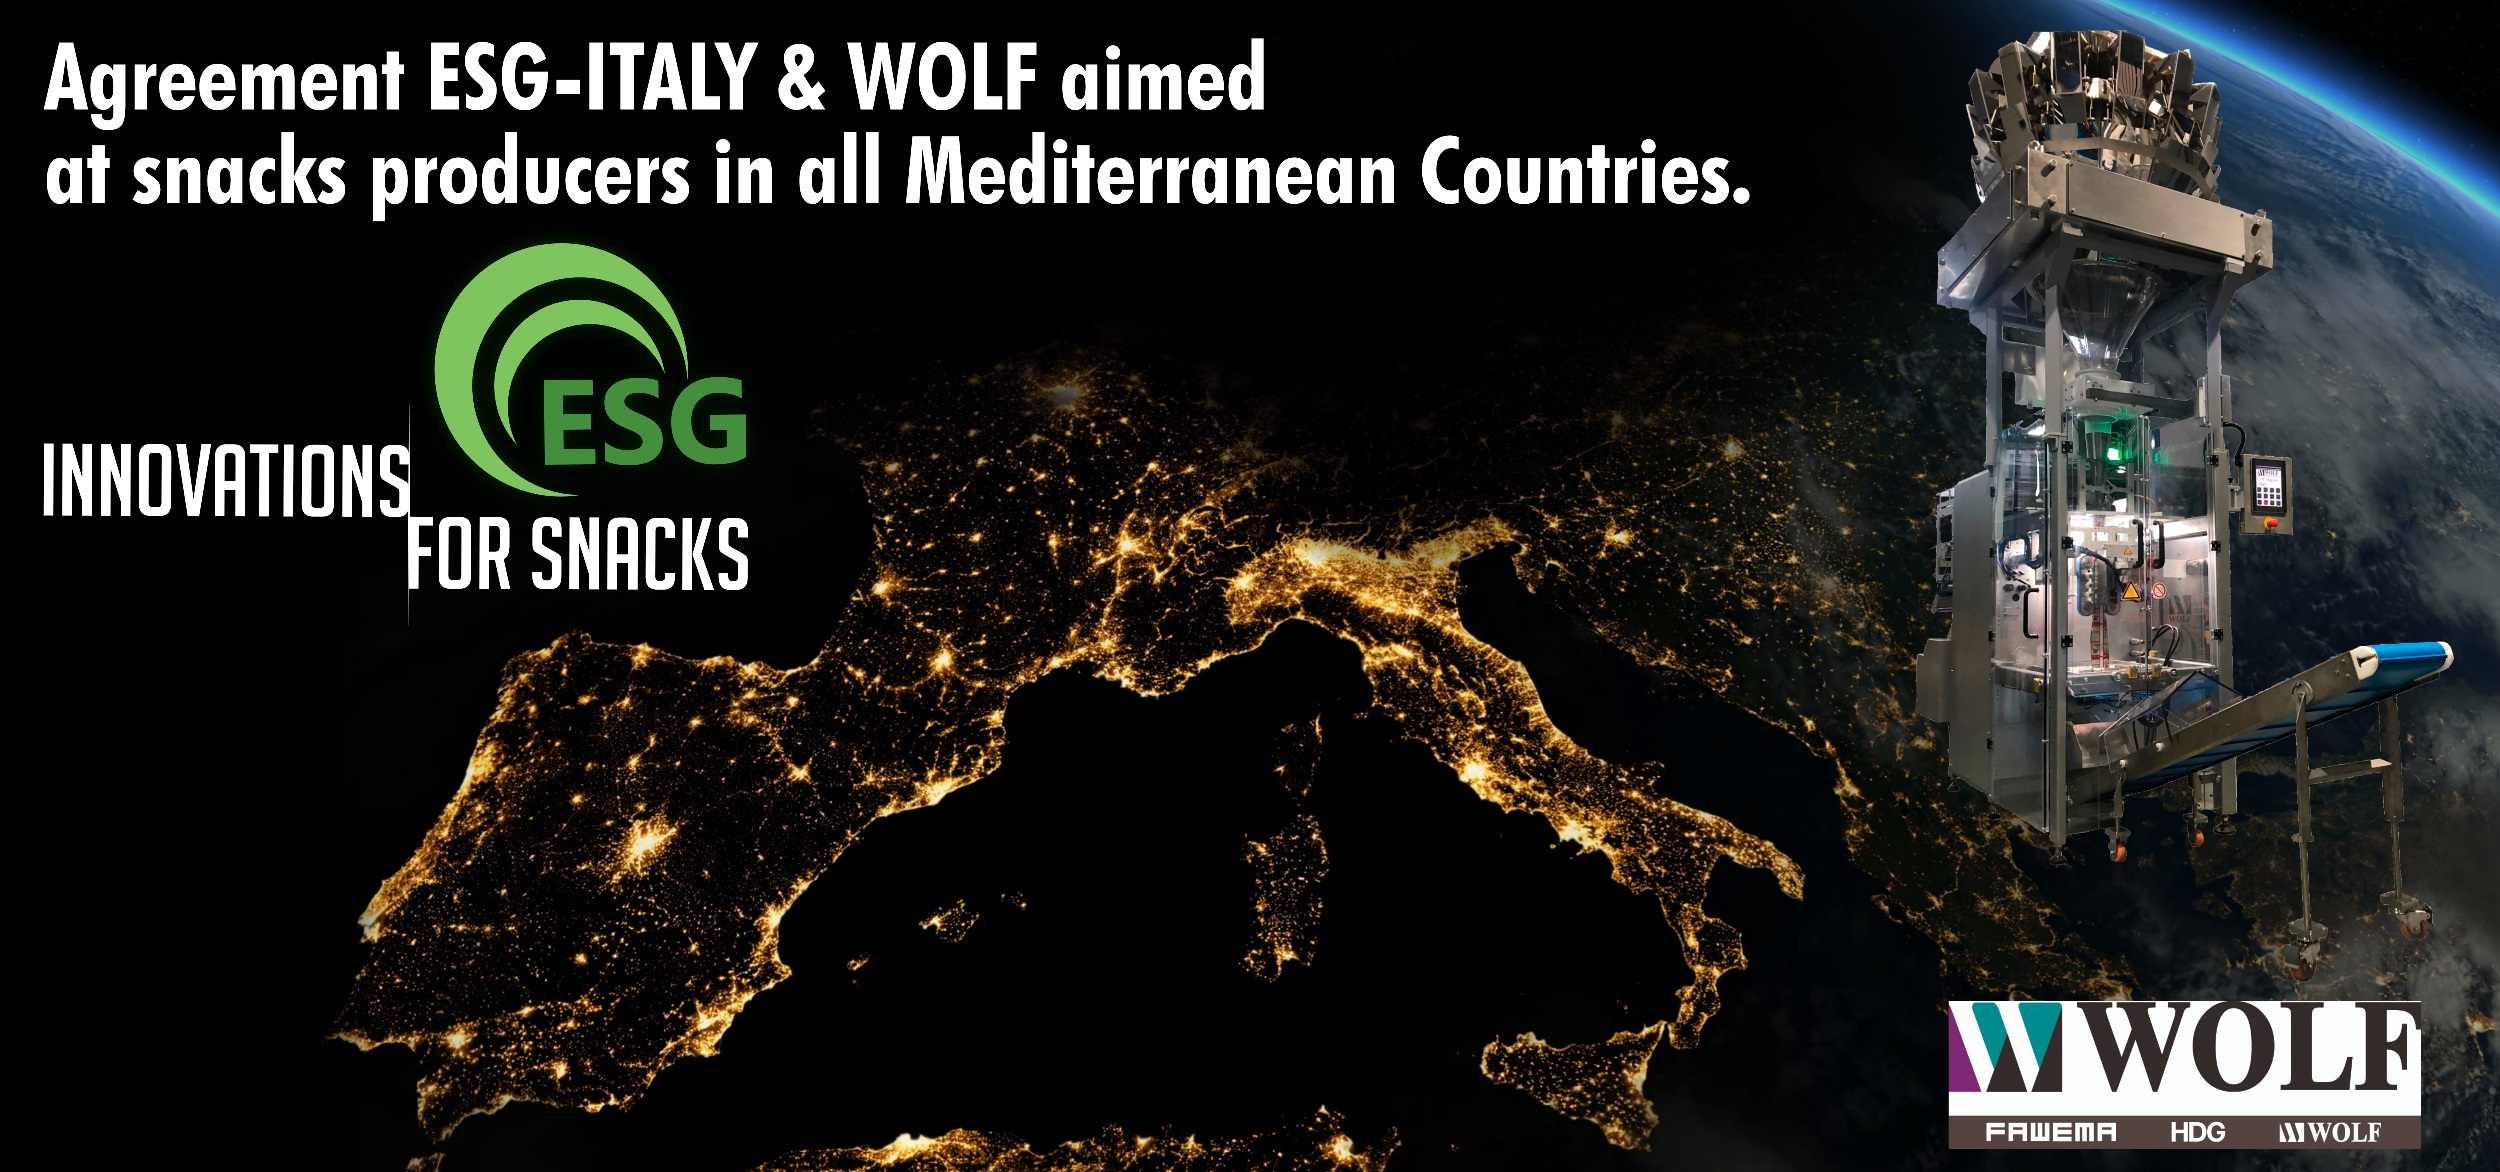 Agreement ESG-ITALY & WOLF aimed at snacks producers in all Mediterranean Countries